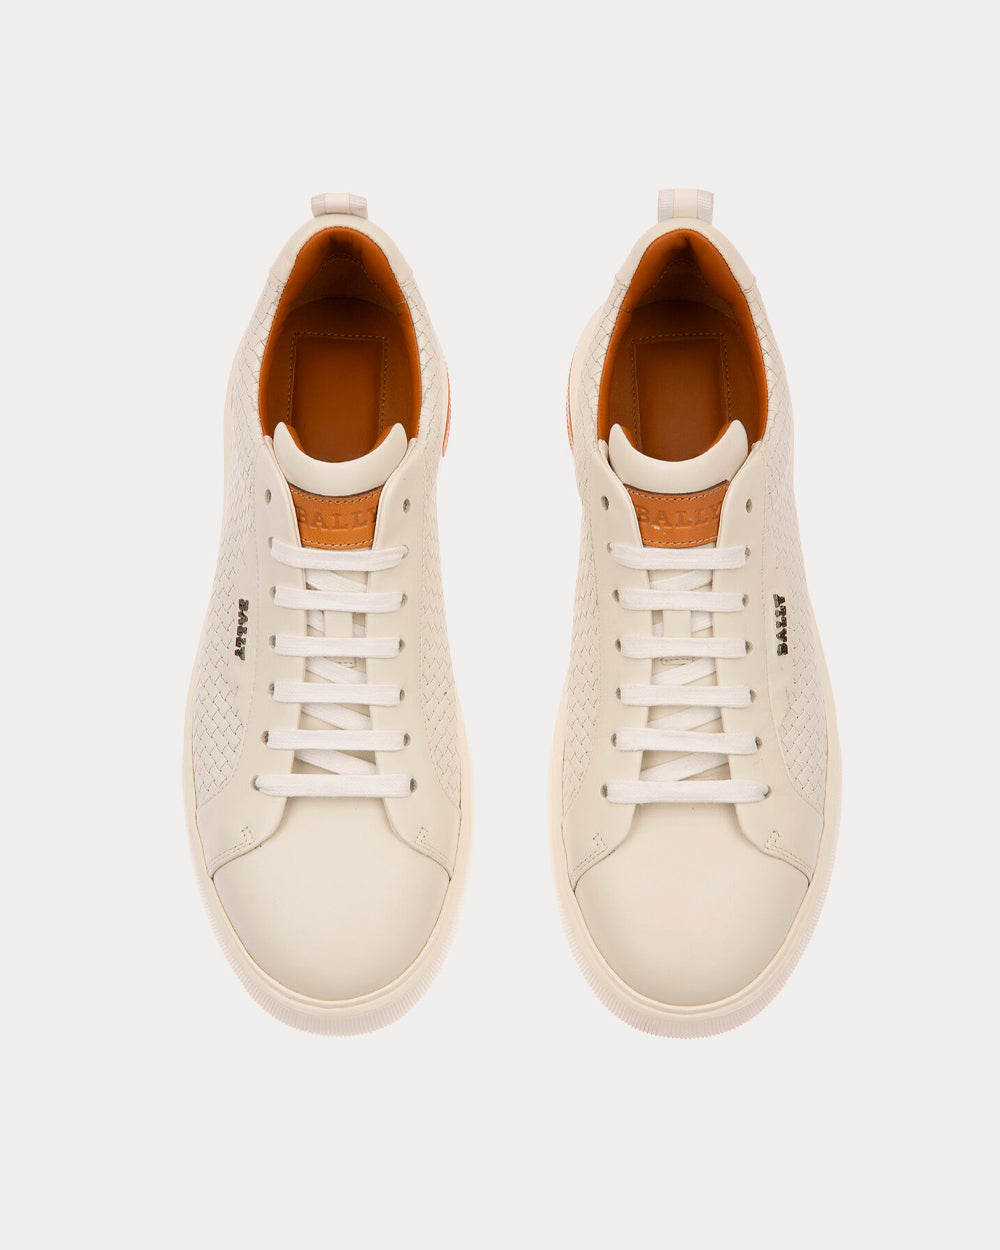 Bally Mickey Artisanal Leather White Low Top Sneakers - Sneak in Peace